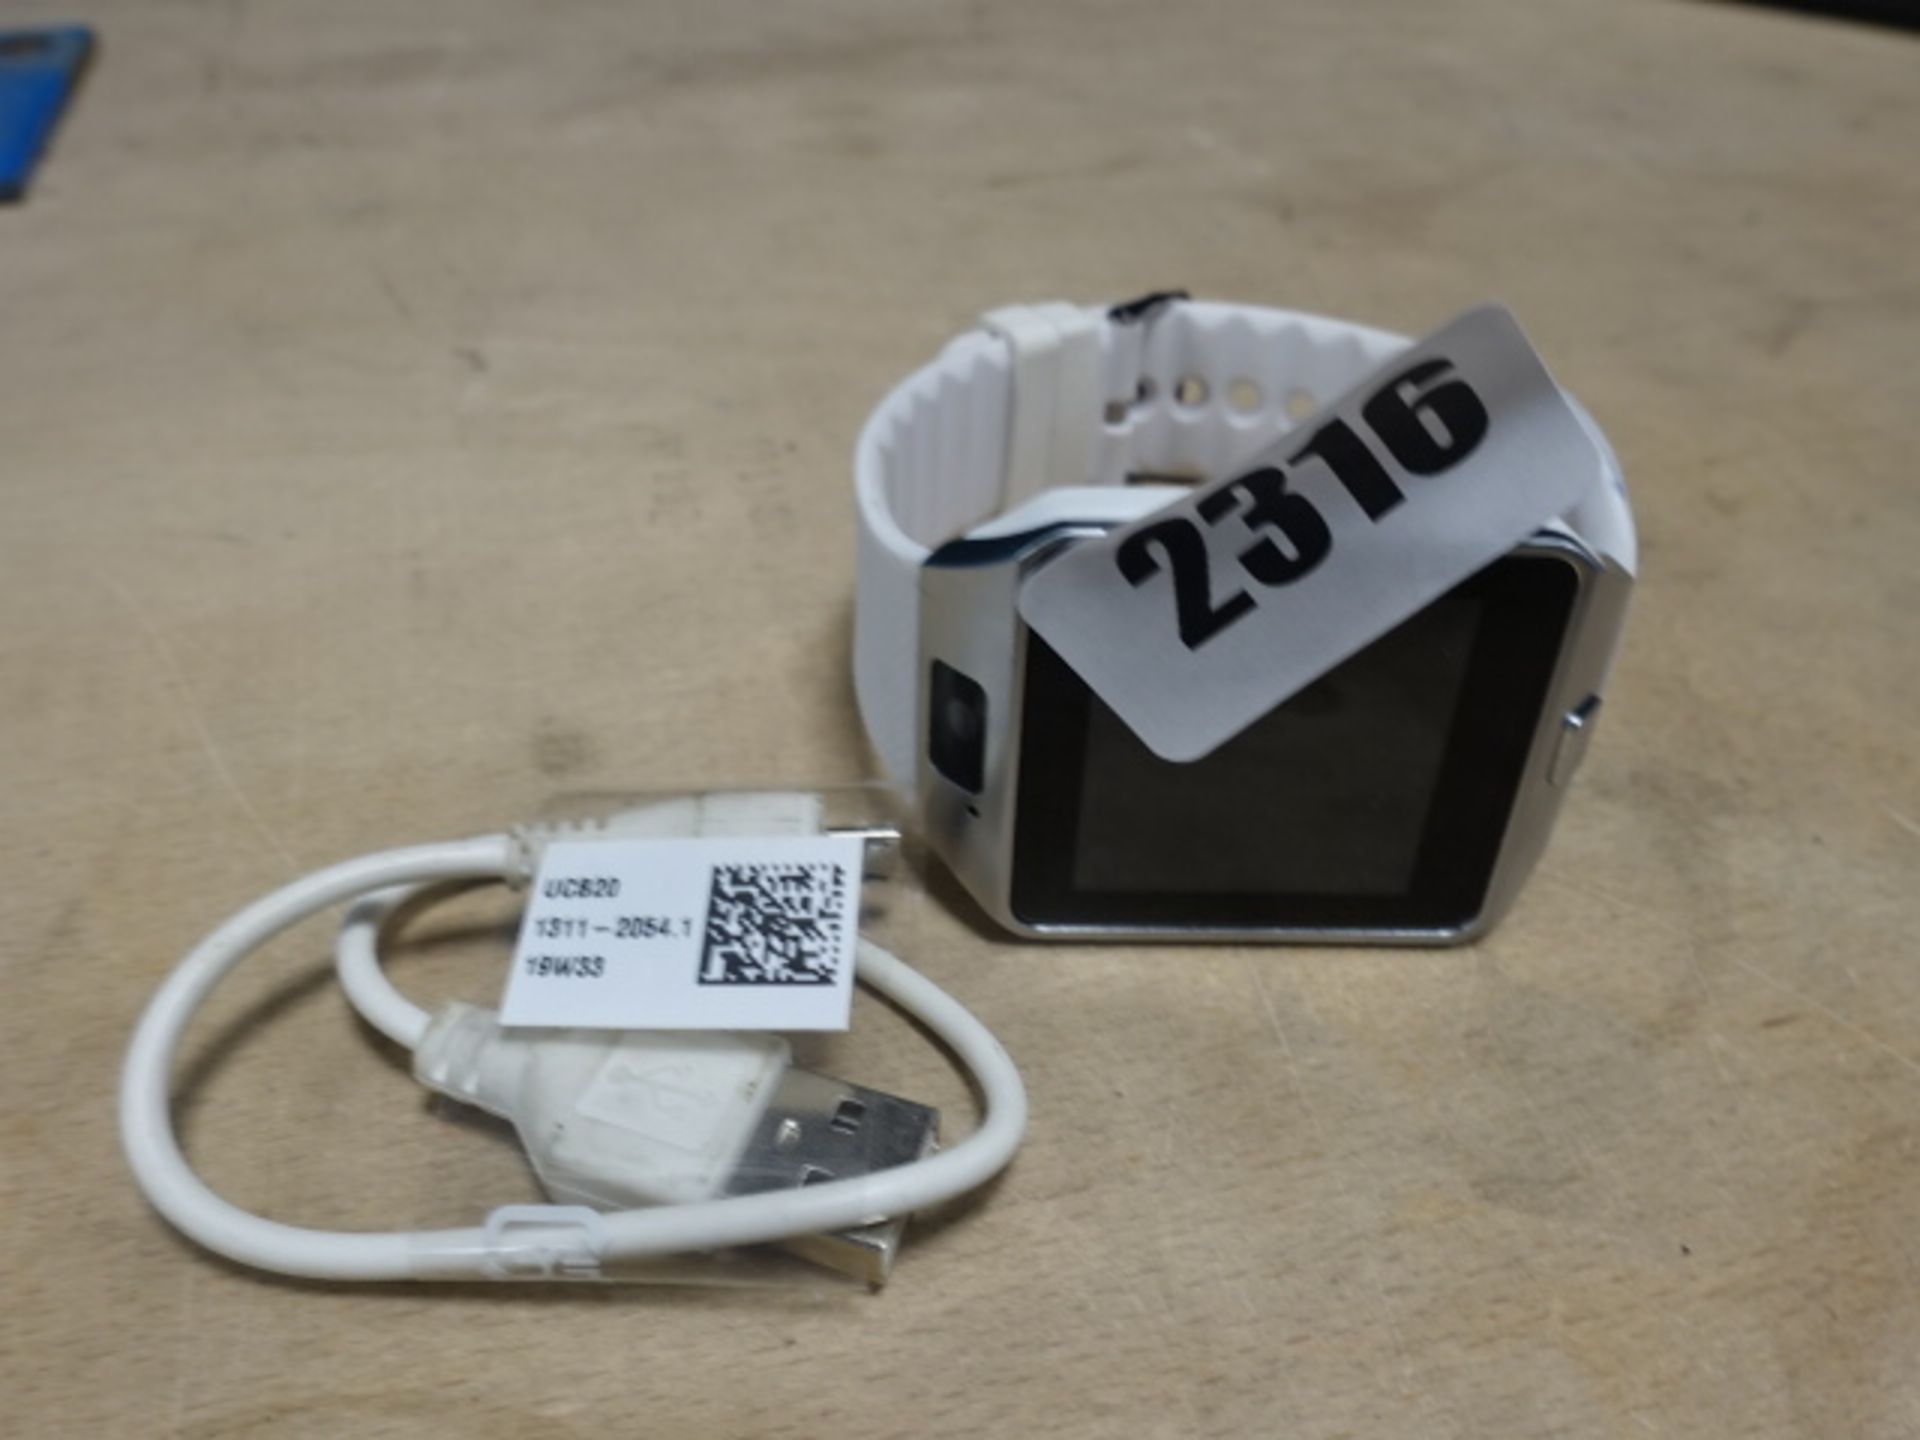 Android smart watch with charging cable